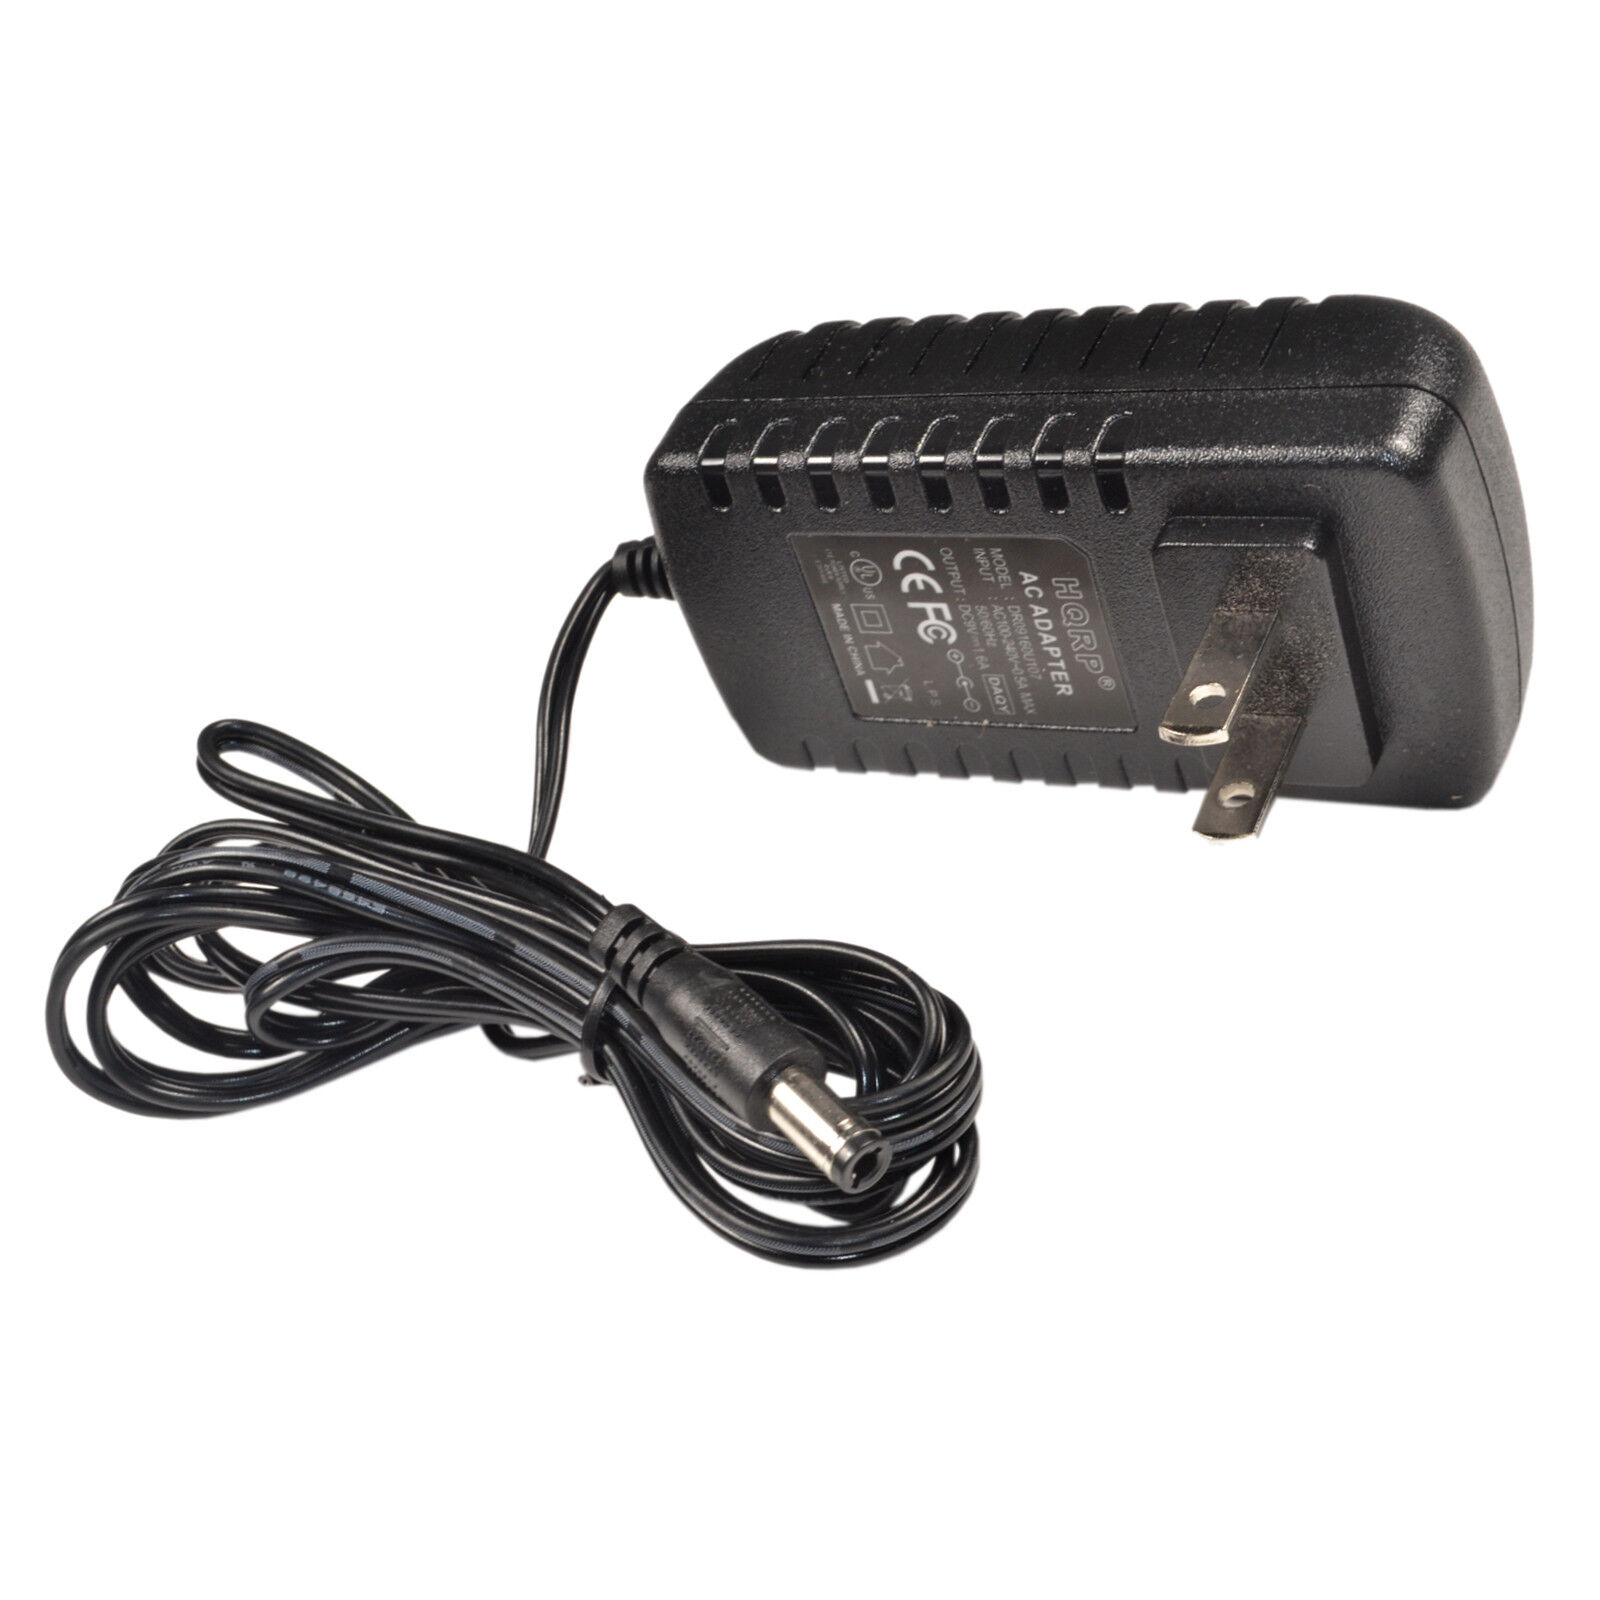 HQRP AC Power Adapter for Brother P-Touch PT-2730VP PT-350 PT-D200